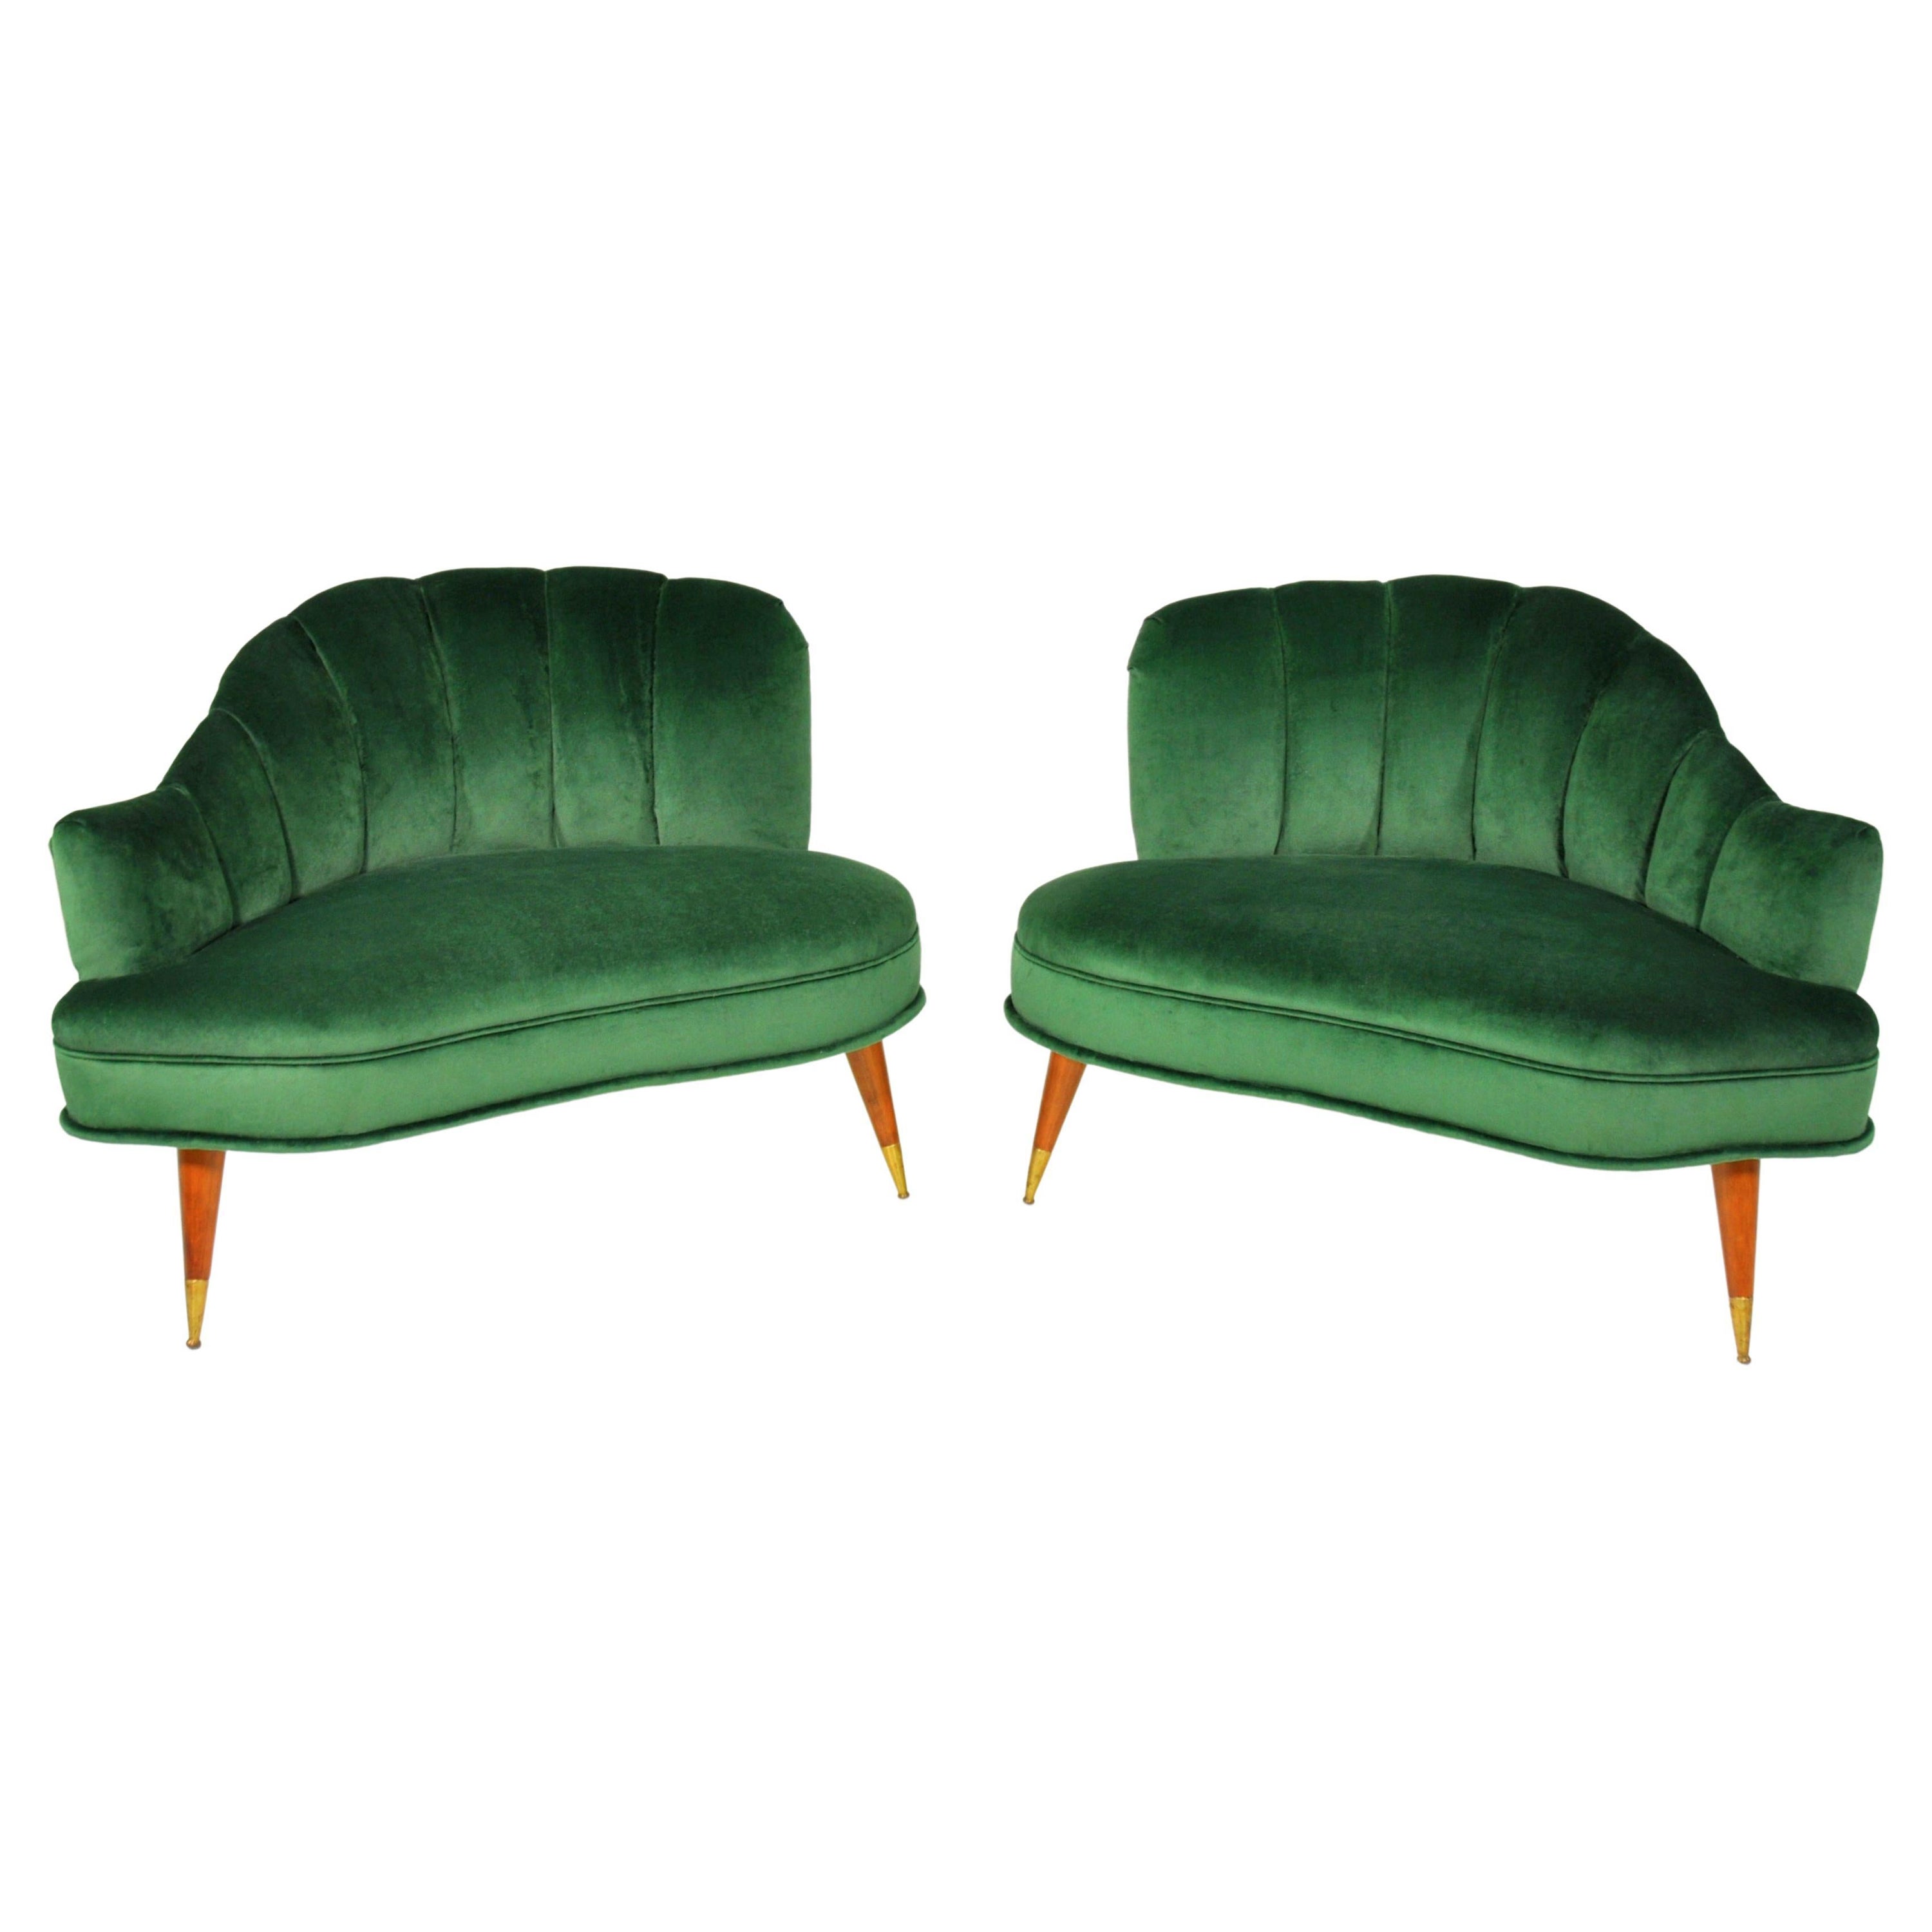 Hollywood Regency Mid-Century Modern Channel Back Lounge Chairs - Pair For Sale 1